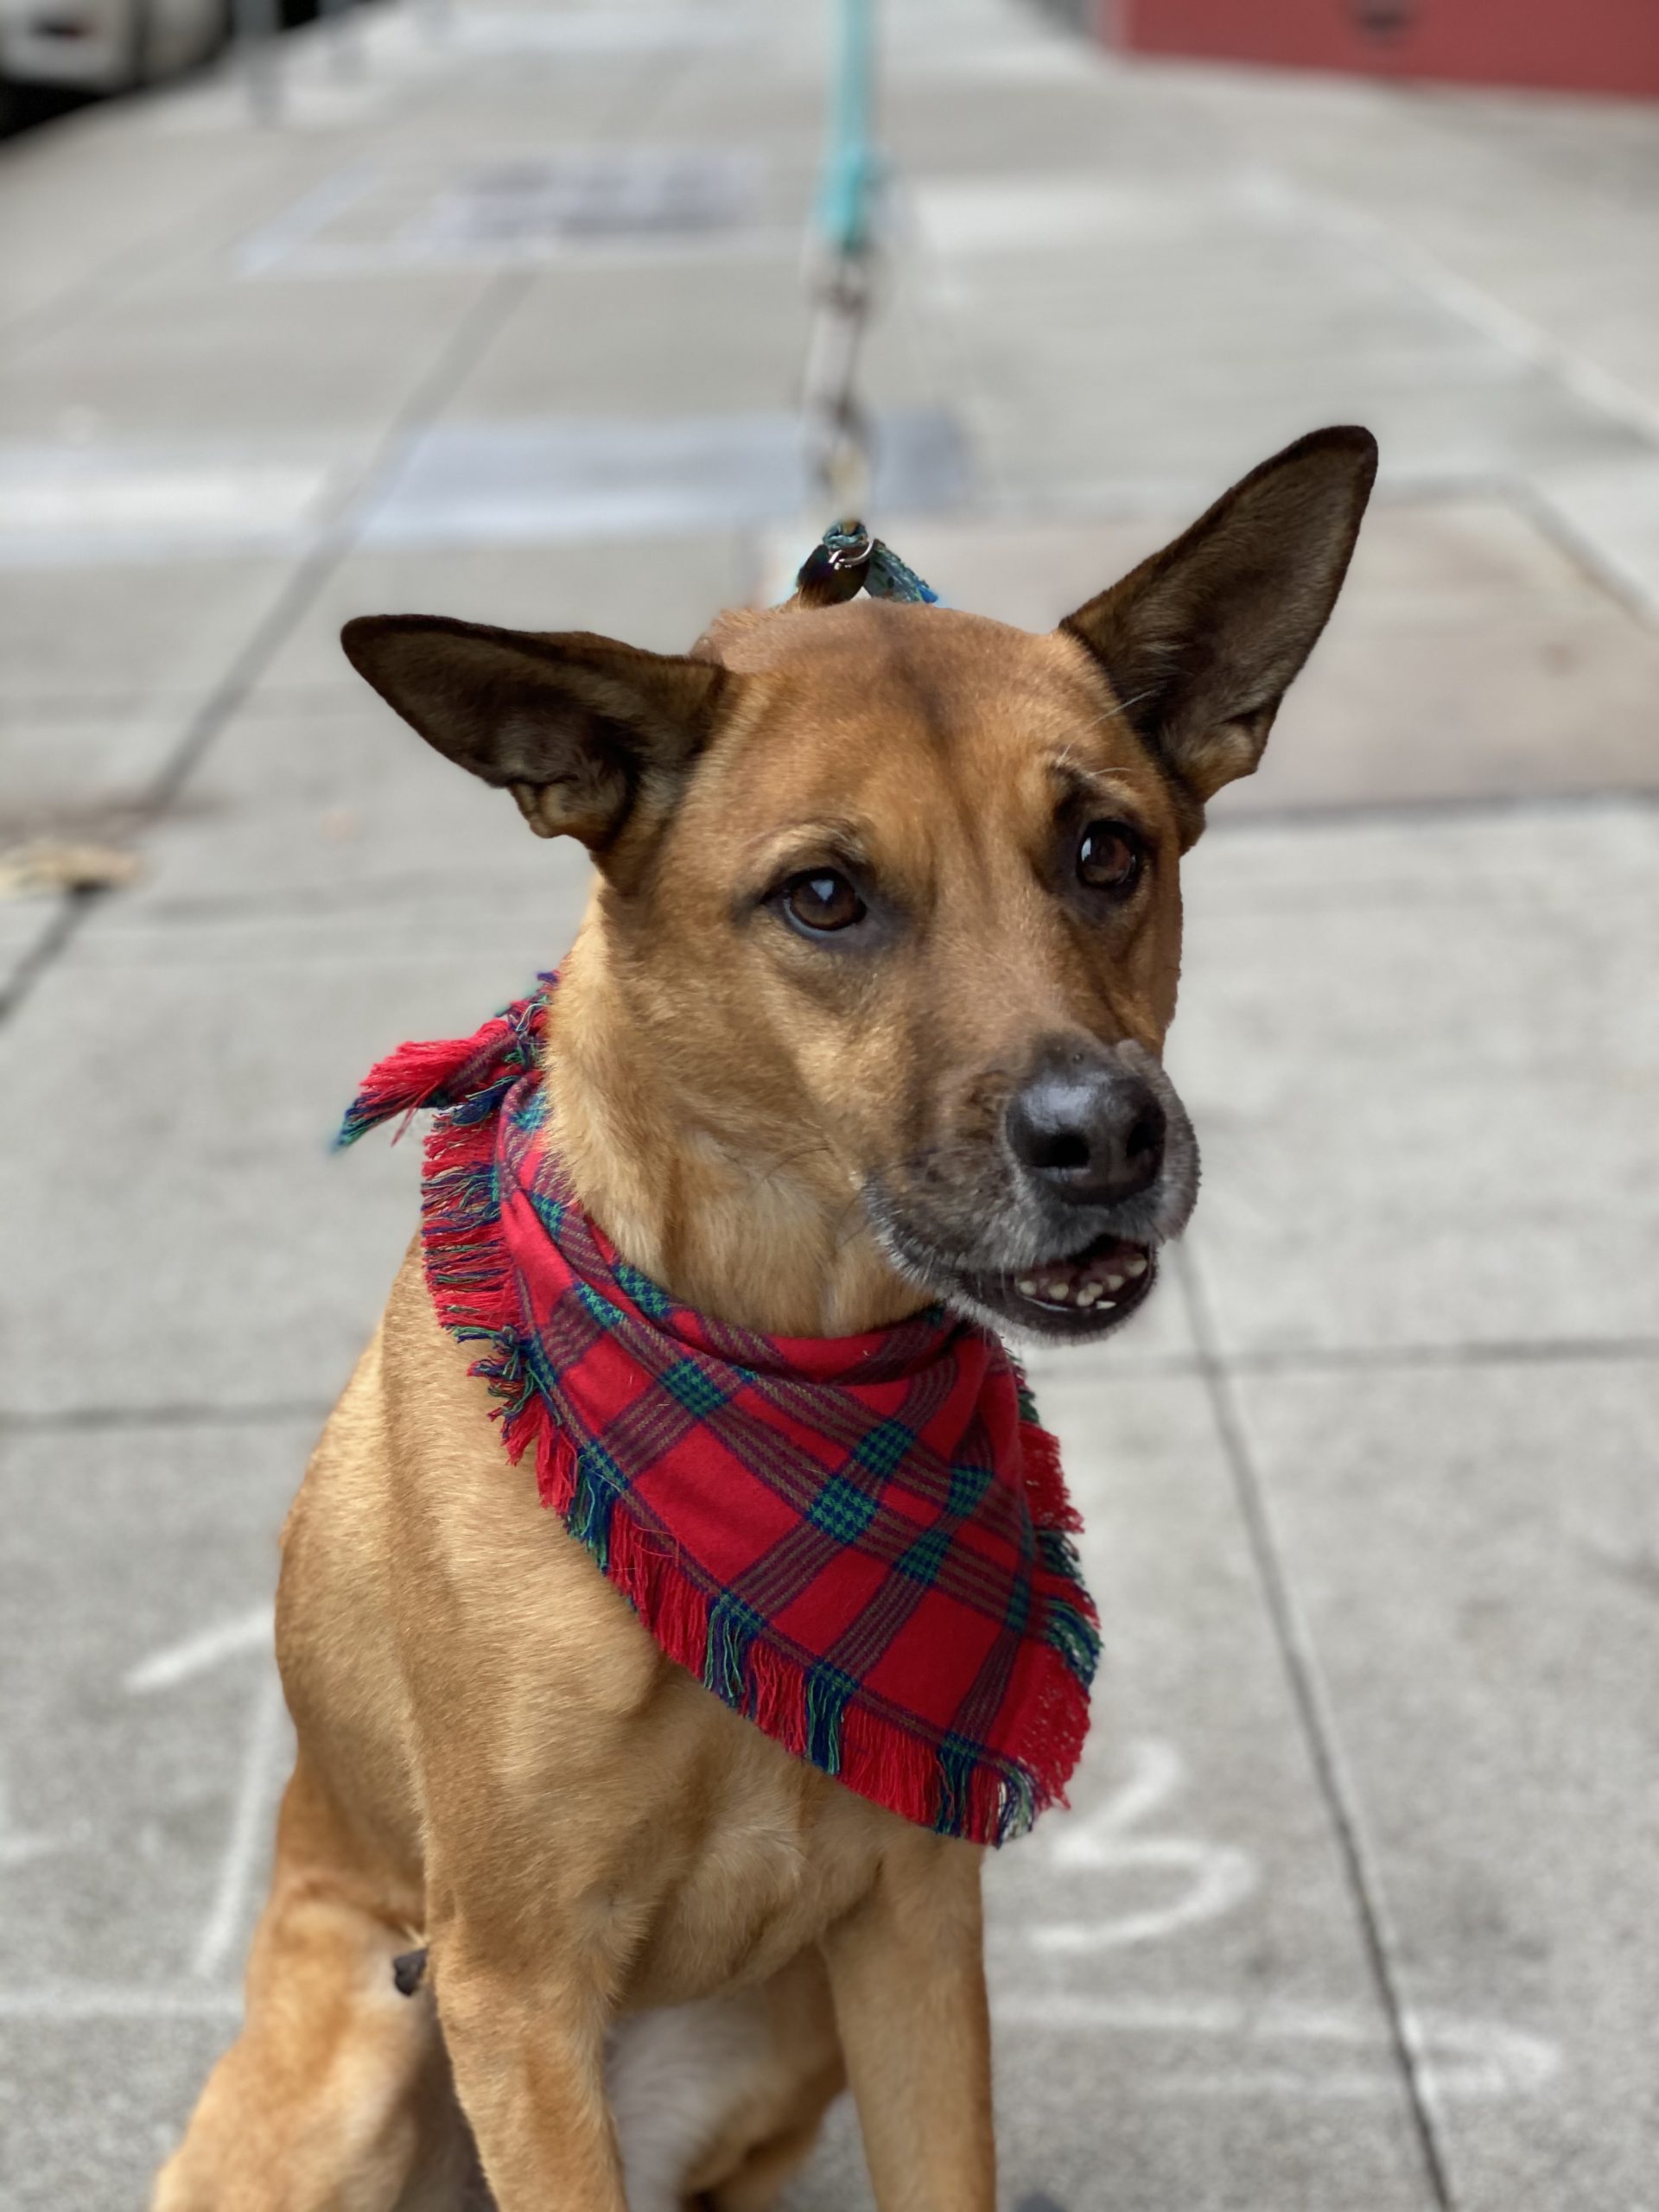 Grinning Pointy-Eared Mutt With Red Bandana